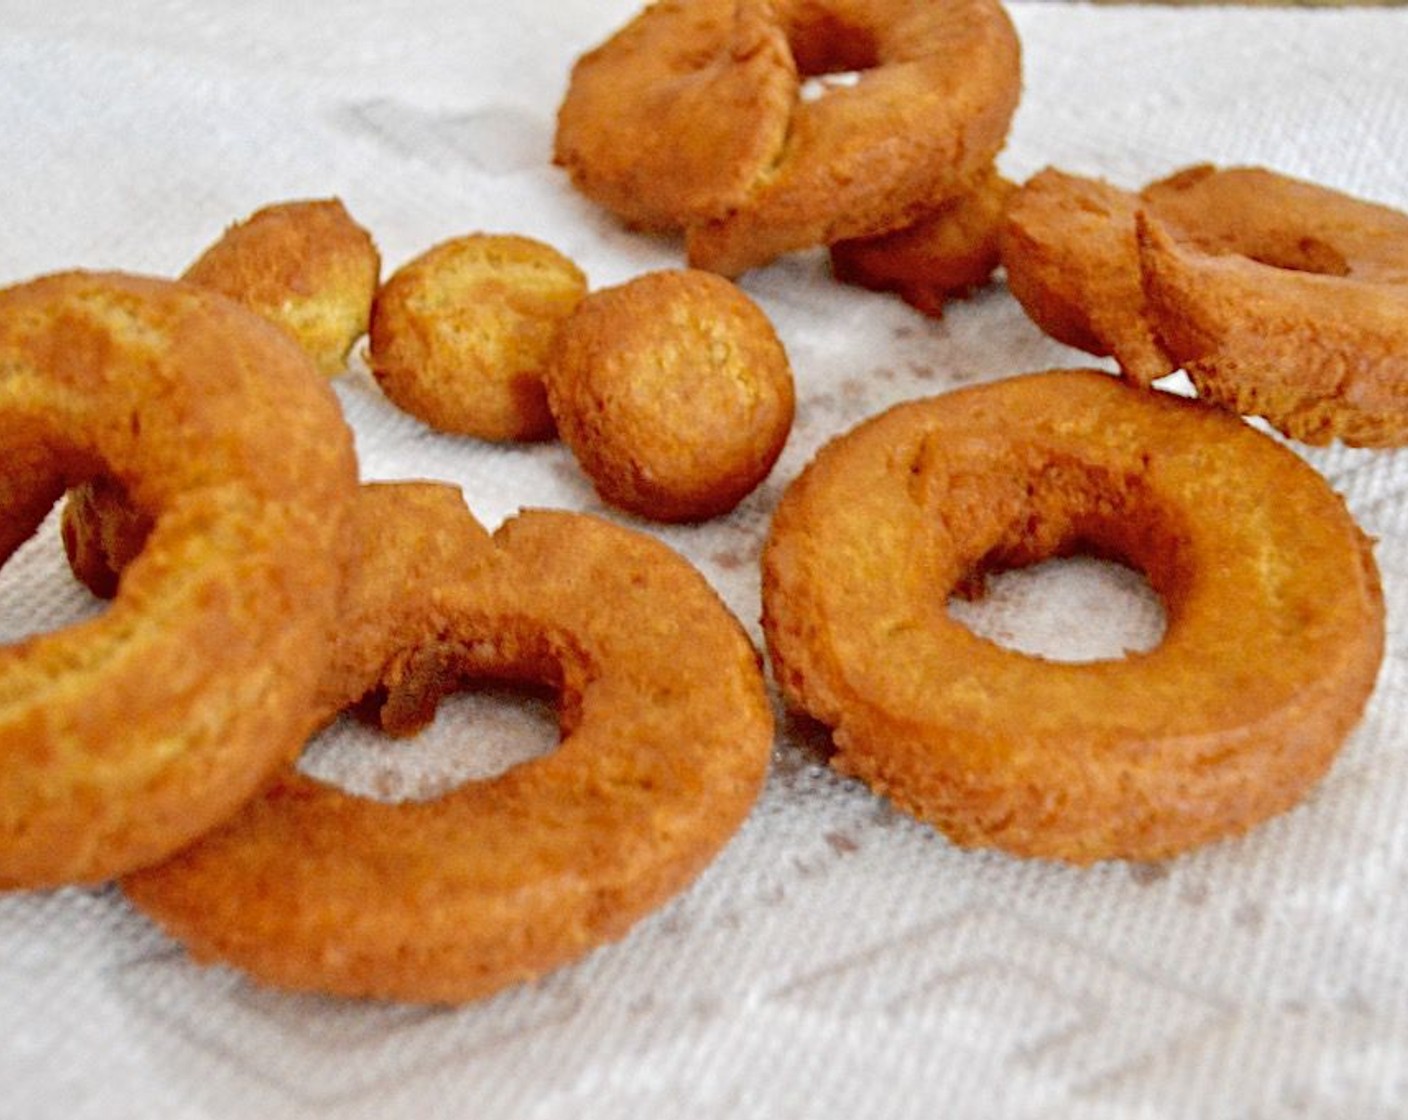 step 9 Fry the donuts in batches for about a minute on each side, removing them to a plate lined with paper towel to drain. While they cook, stir the remaining pumpkin pie spice and granulated sugar together.